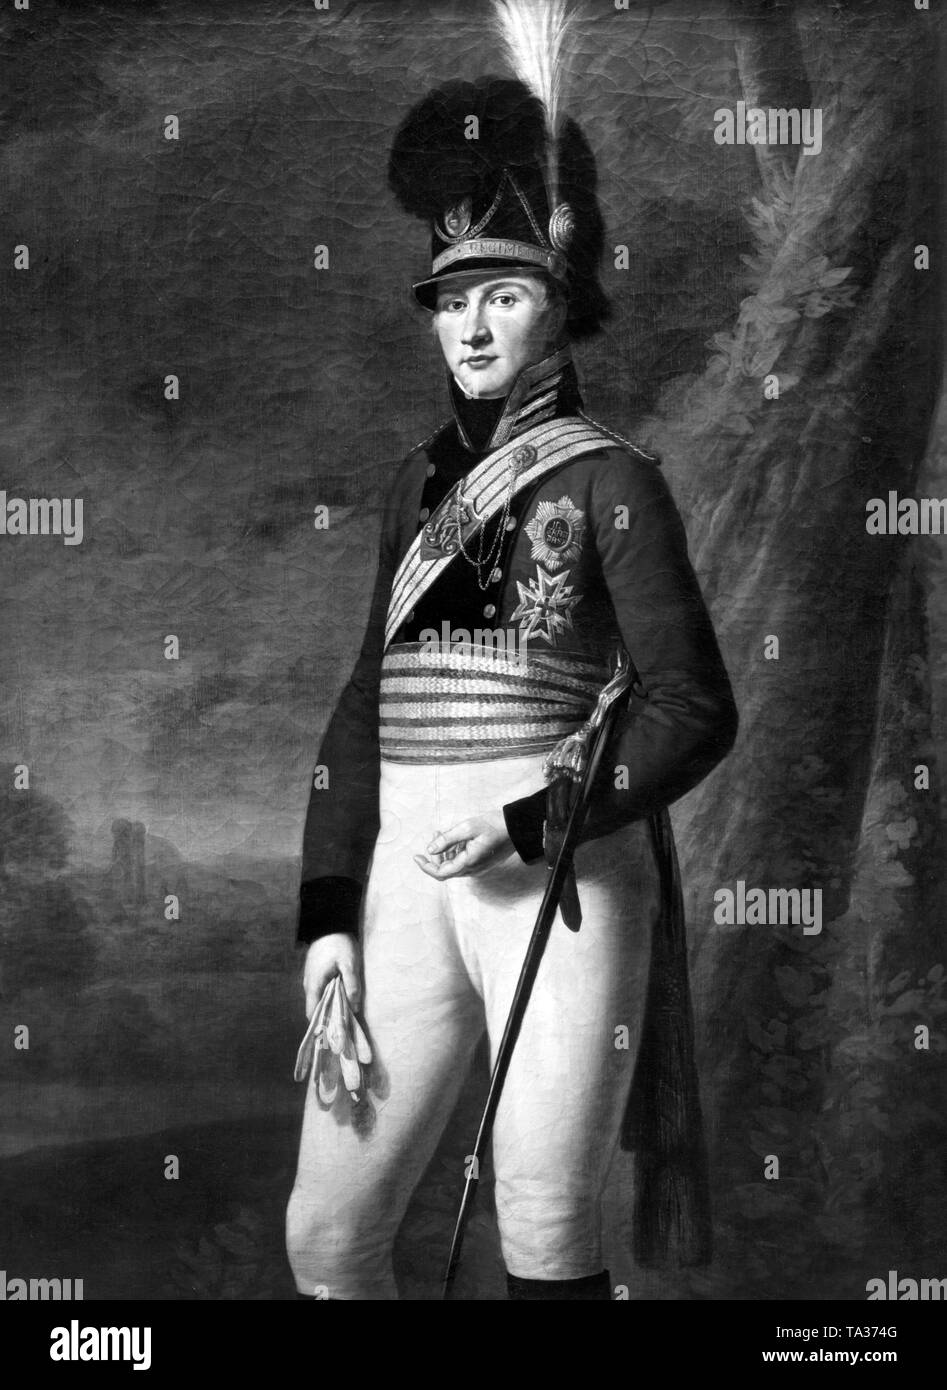 This painting by Franz Kobell shows the then crown prince Ludwig I of Bavaria in uniform. The painting was probably made at the beginning of the 19th century. After the revolution of July 1830 in Paris, King Louis I conducted a reactionary, restrictive policy, he reinstated the censorship and eliminated the freedom of the press. Stock Photo